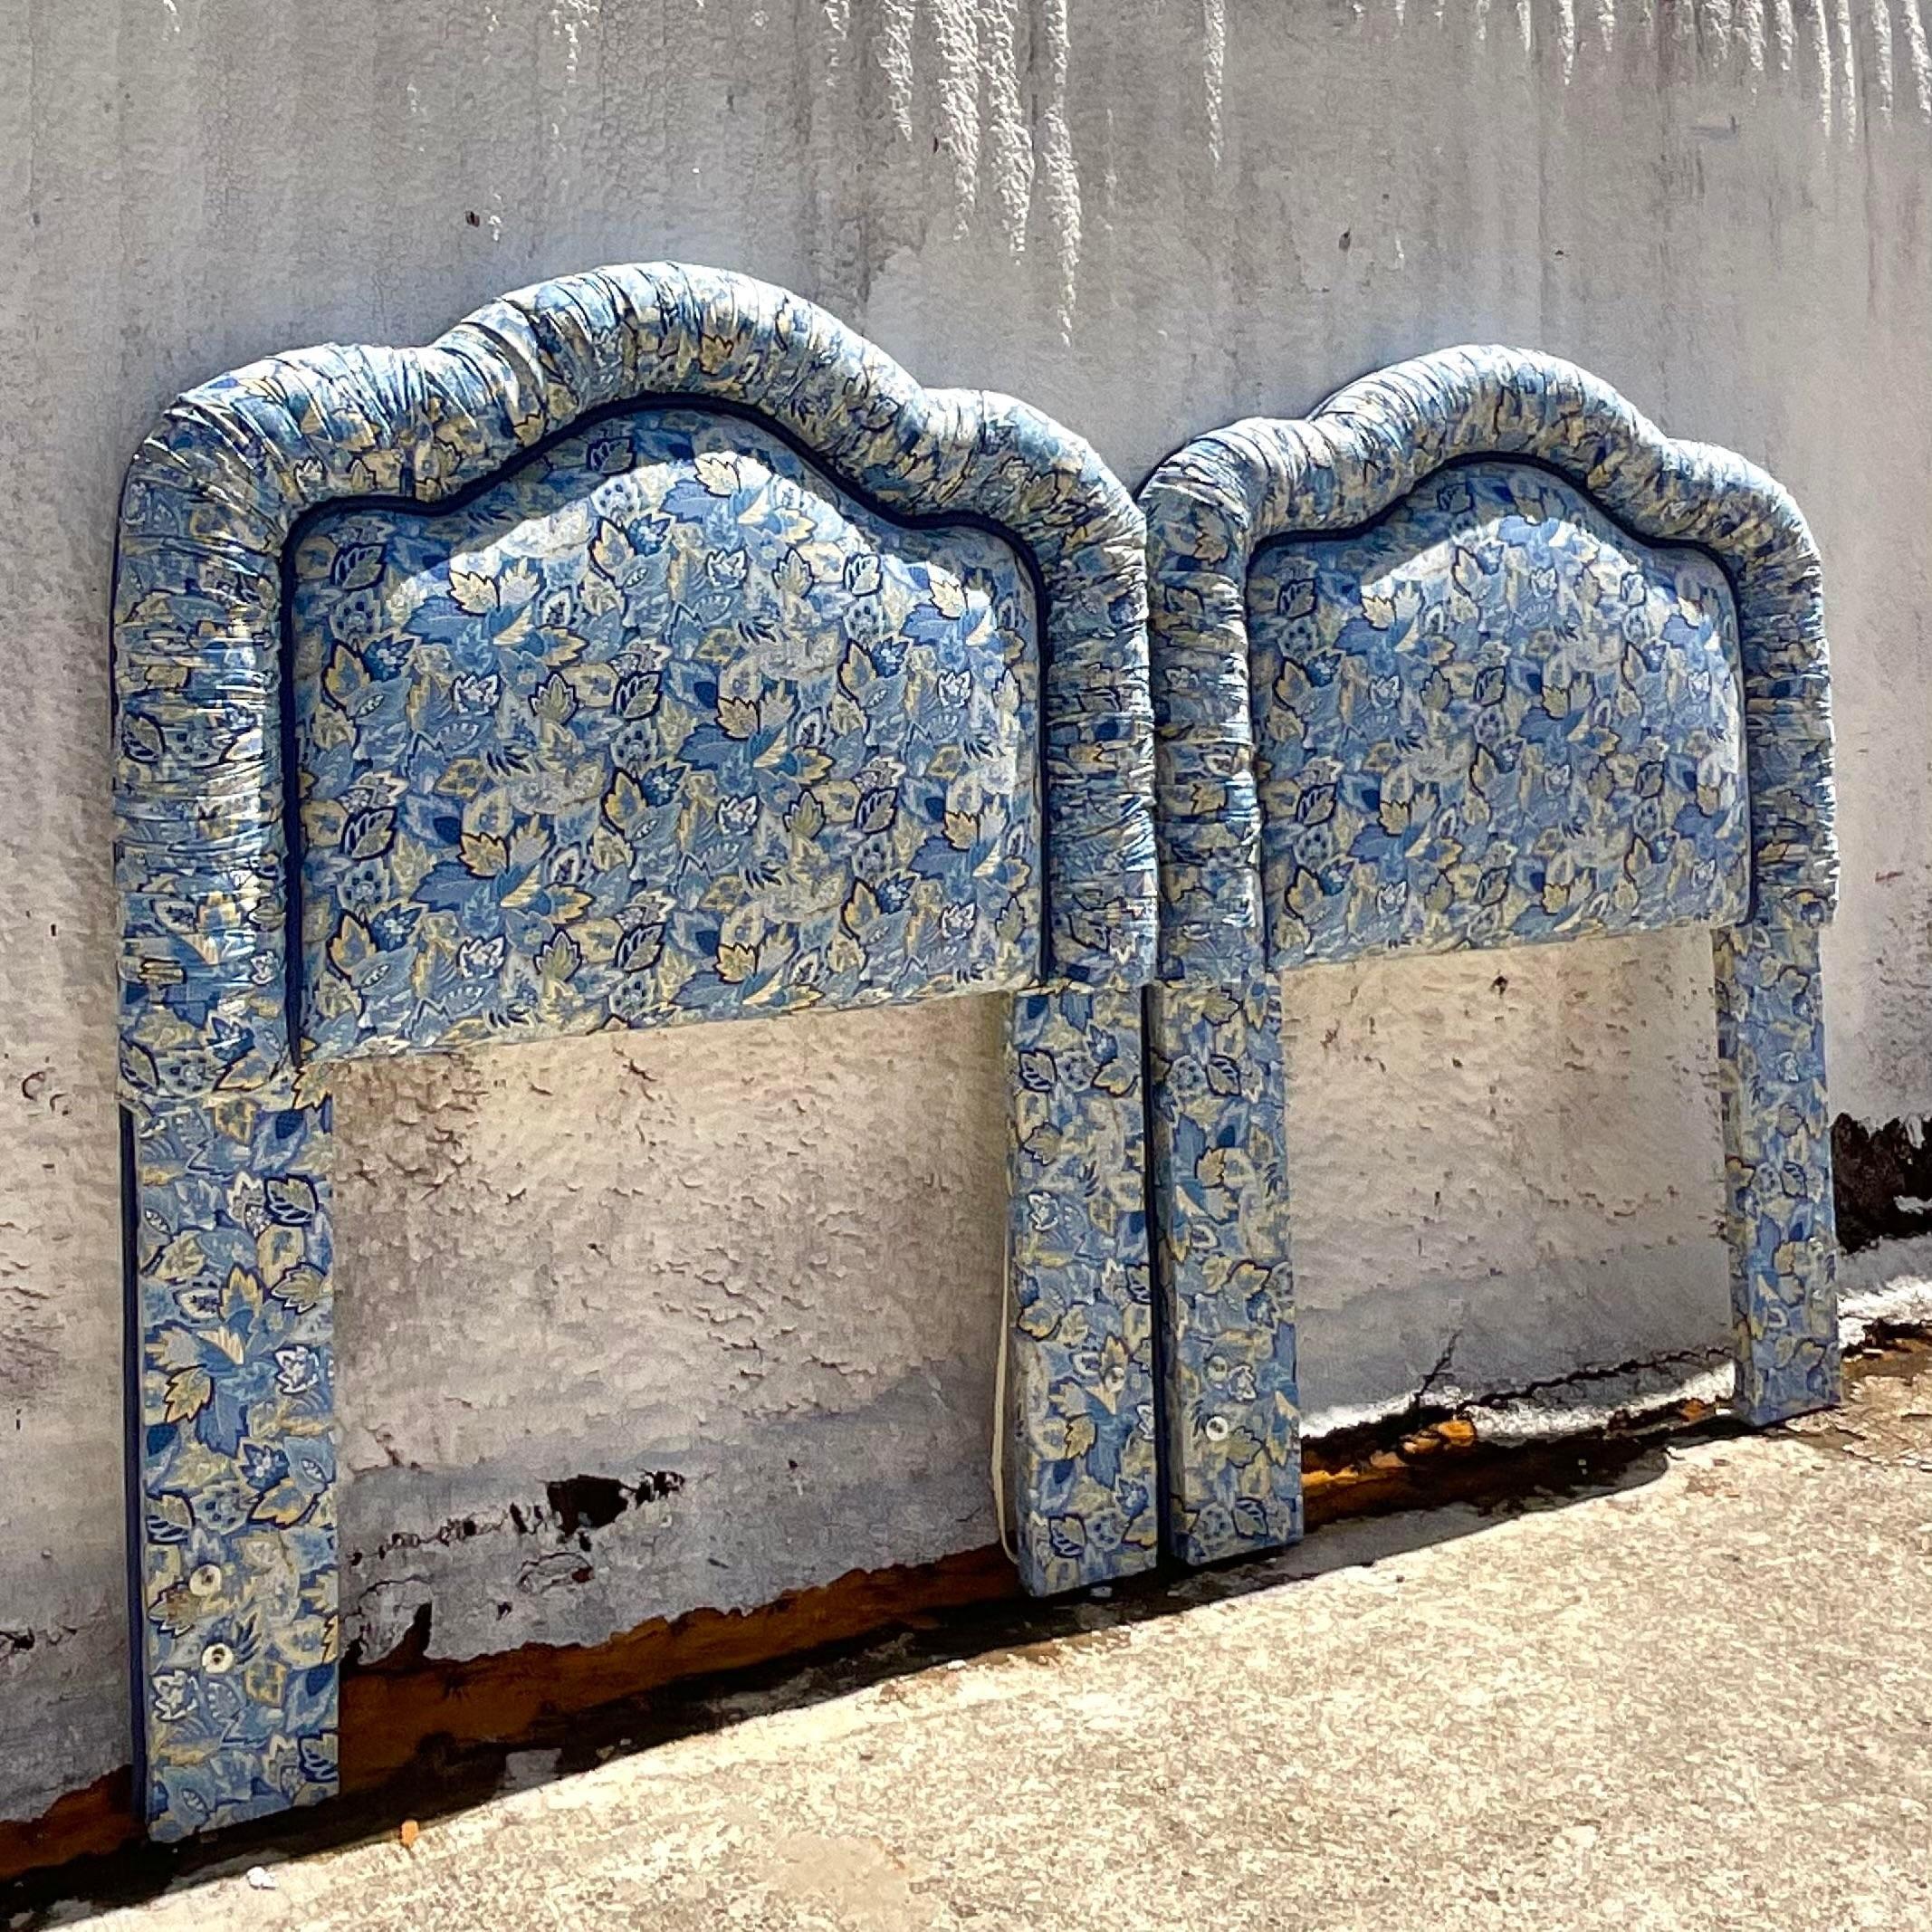 American Late 20th Century Vintage Boho Paisley Upholstered Twin Headboards - a Pair For Sale